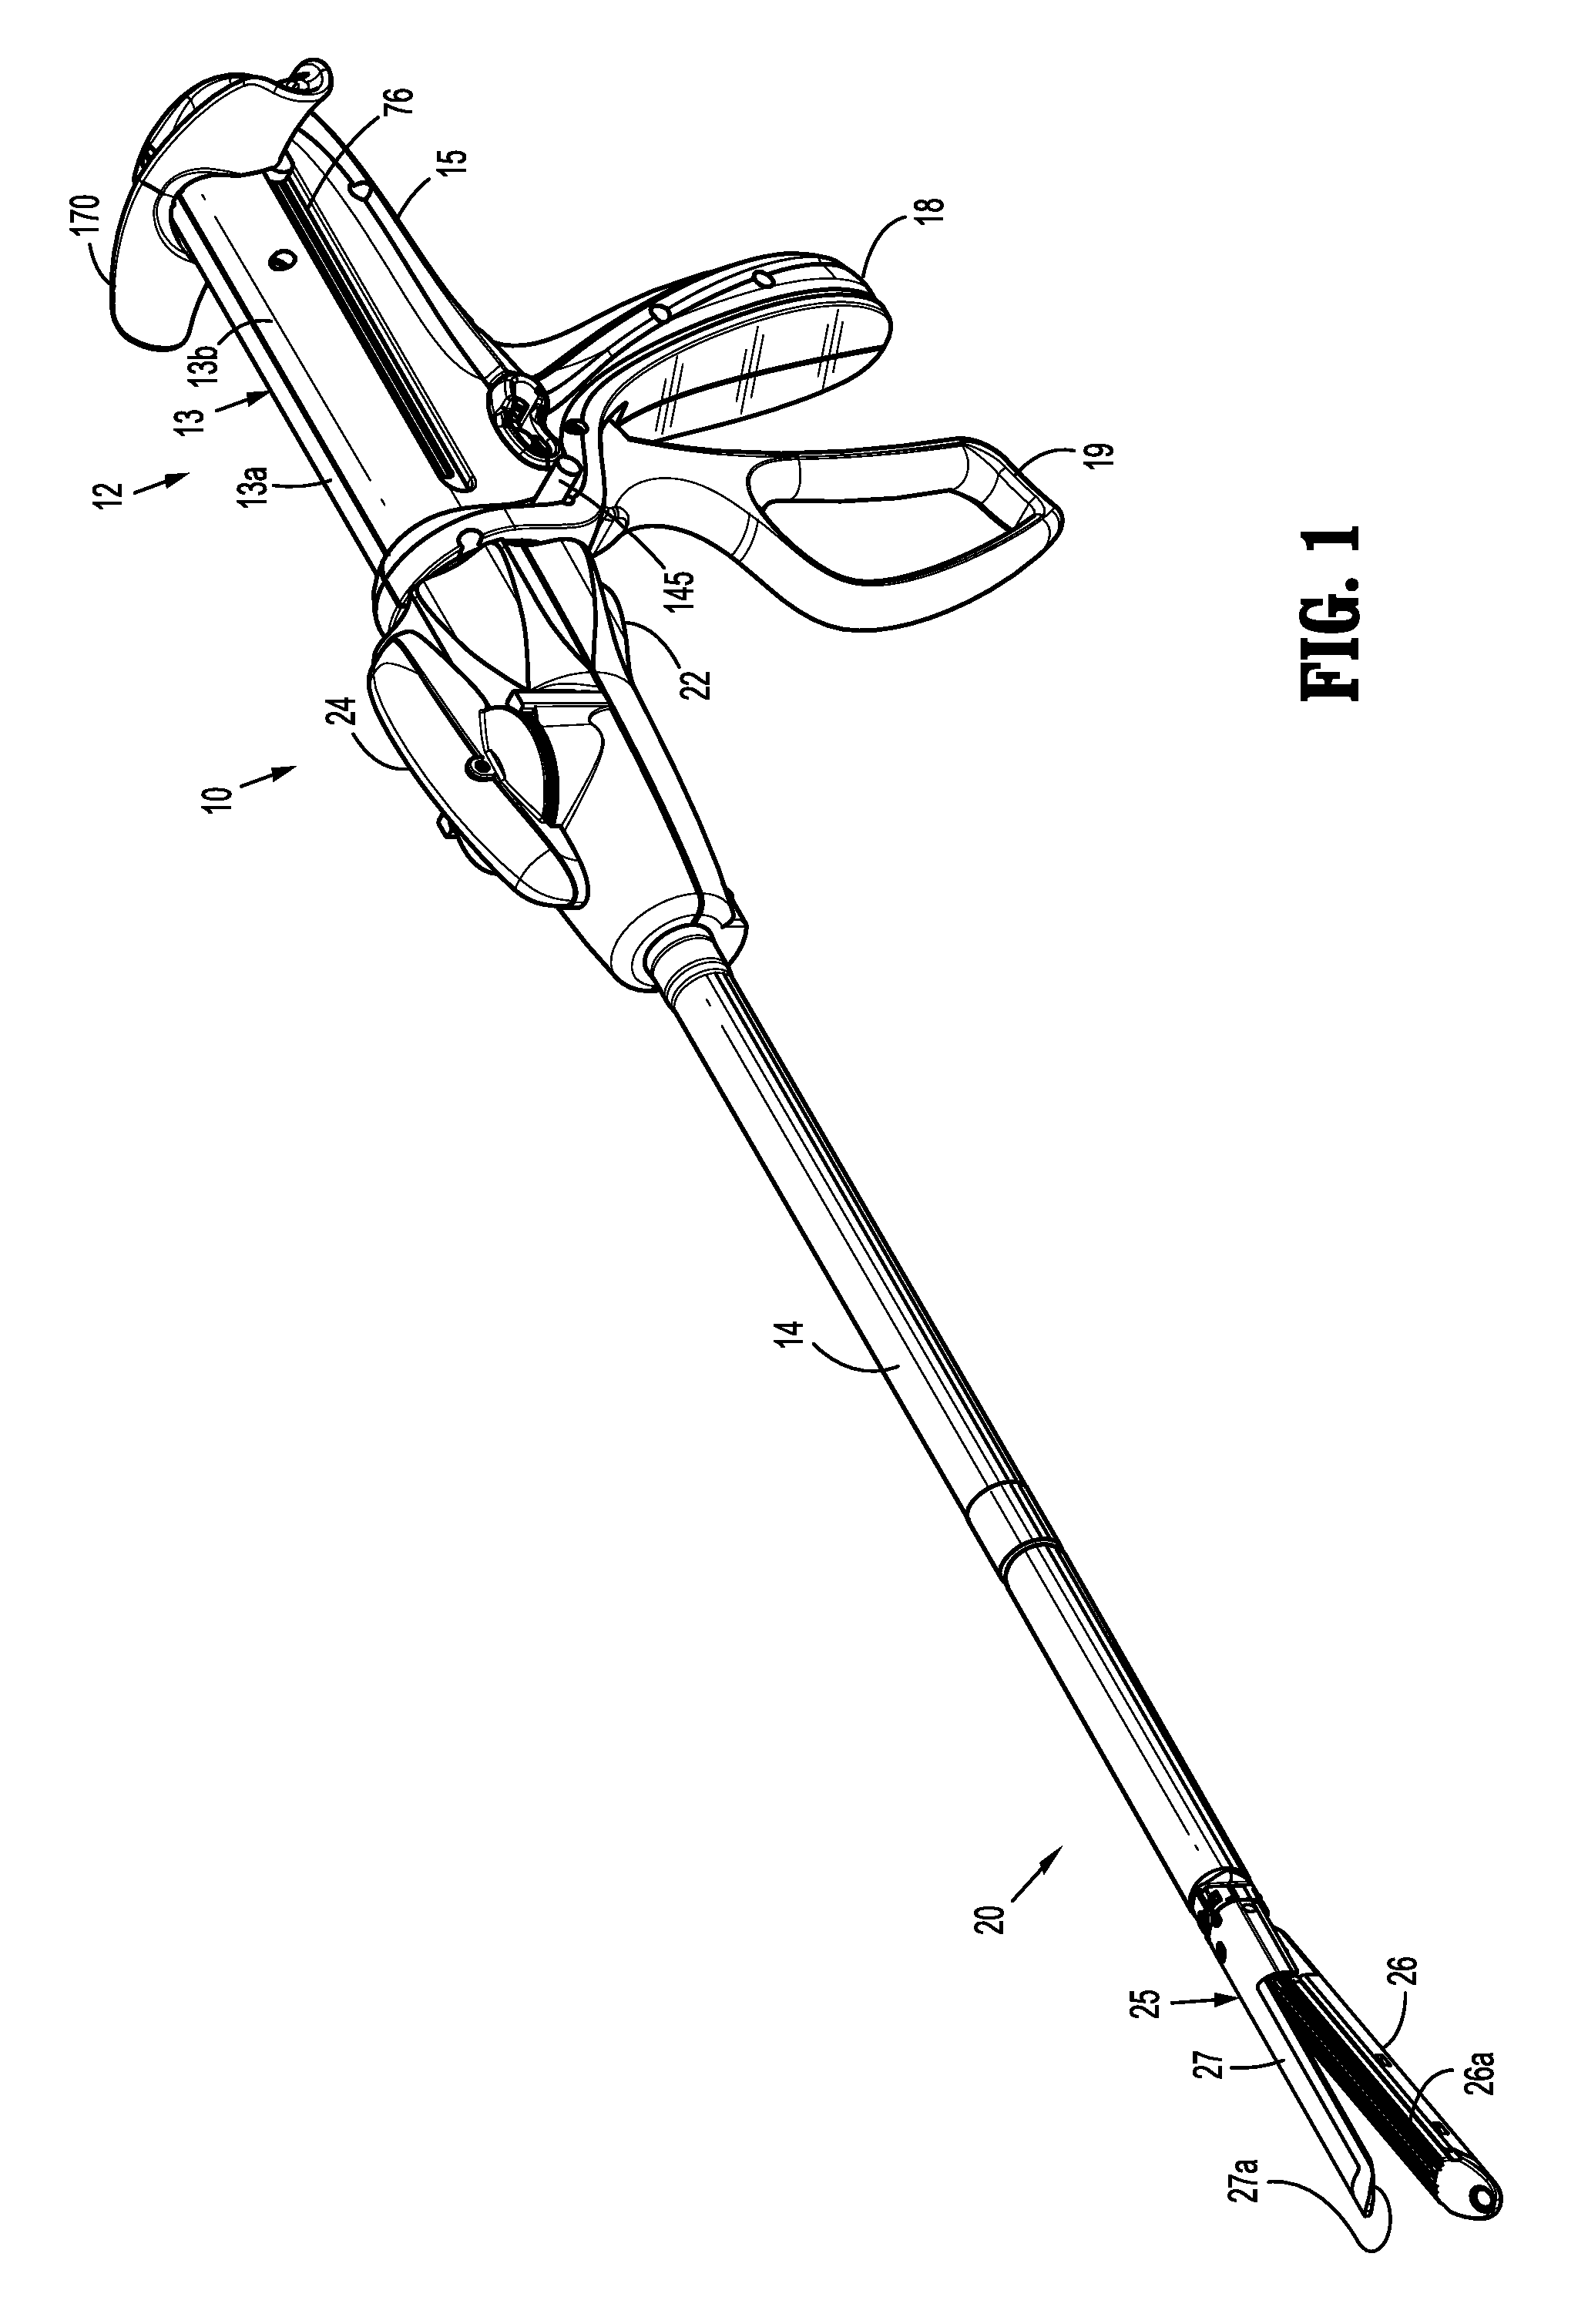 Stapling device with grasping jaw mechanism